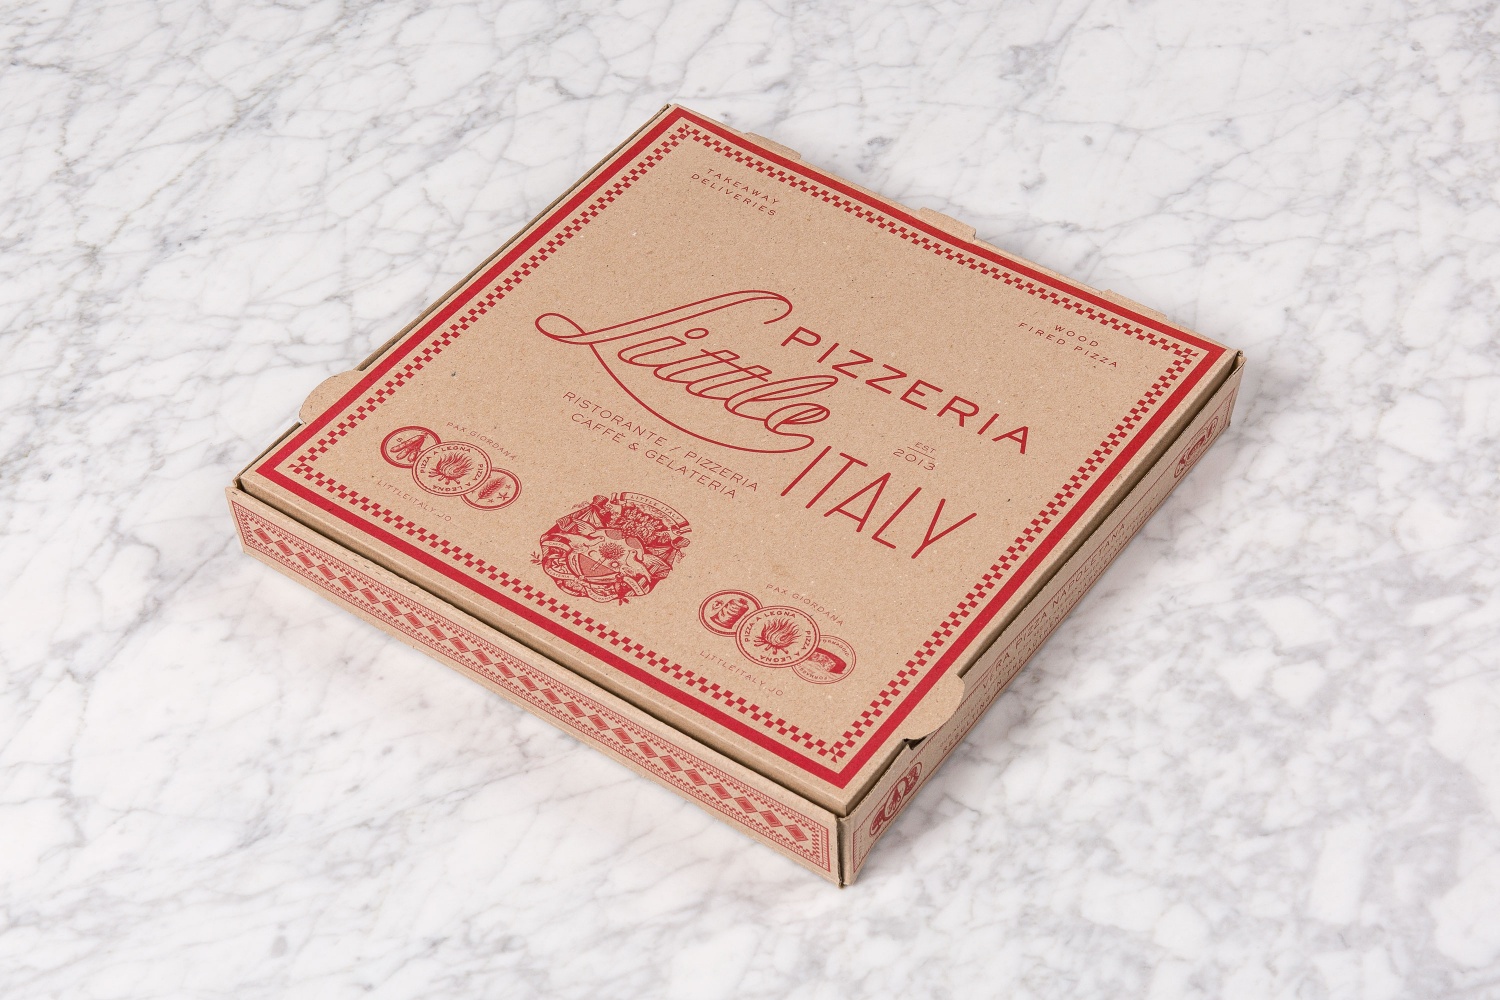 Branding and pizza box by British studio Here Design for Amman-based restaurant Little Italy